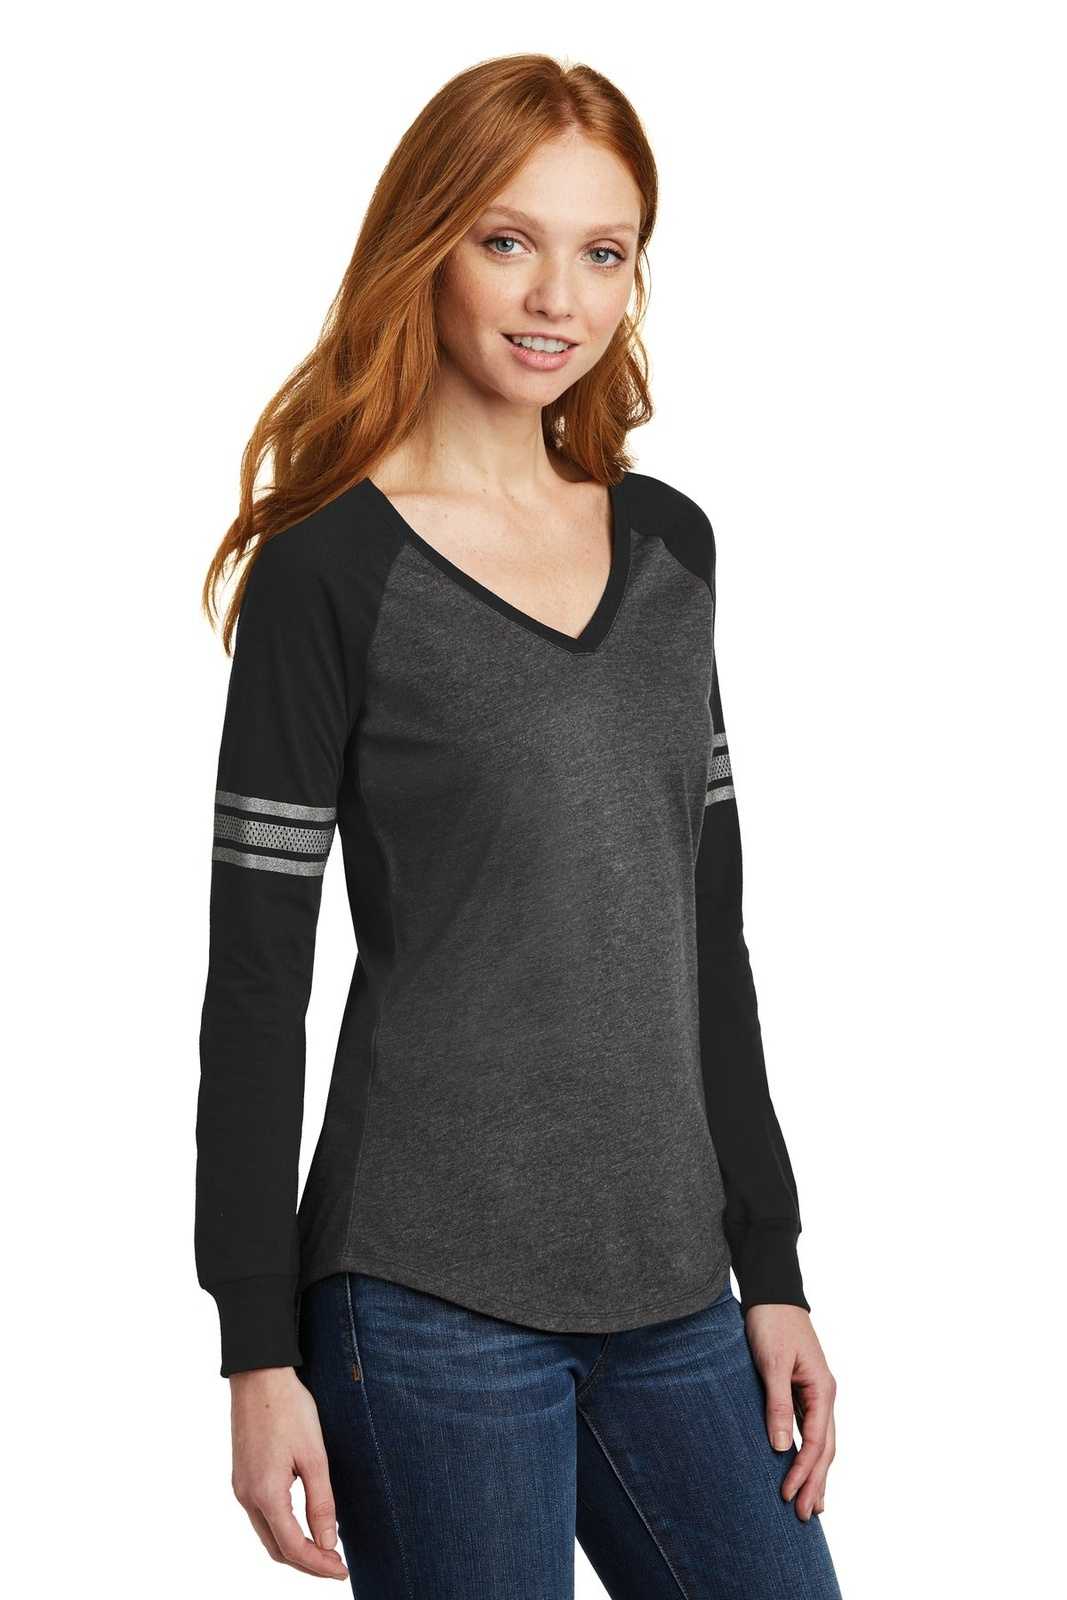 District DM477 Women's Game Long Sleeve V-Neck Tee - Heathered Charcoal Black Silver - HIT a Double - 1